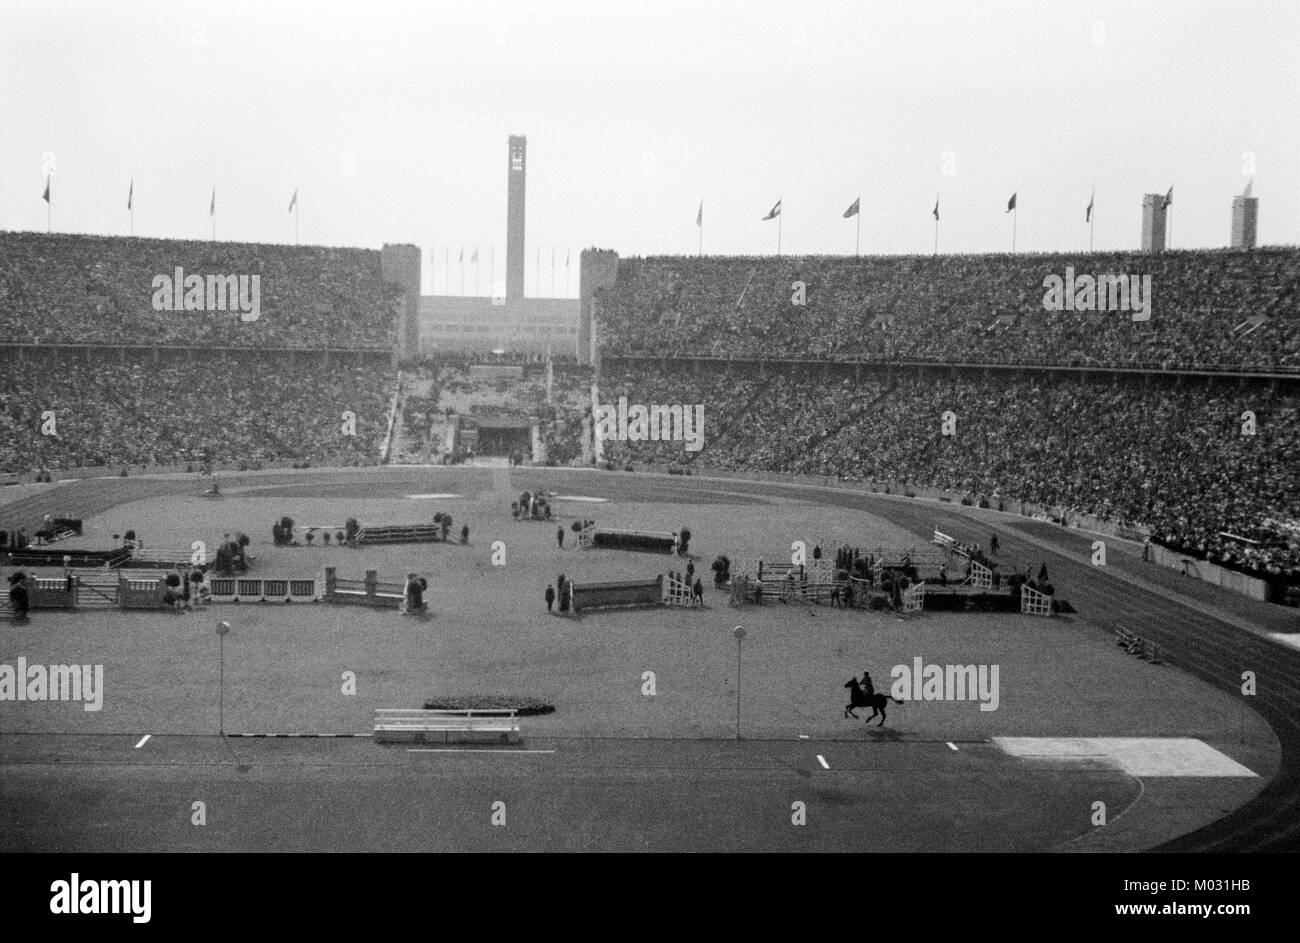 The Berlin Olympic Stadium hosting the 1936 Summer Olympics. An equestrian event underway.To outdo the Los Angeles games of 1932, Adolf Hitler had built a new 100,000-seat track and field stadium, six gymnasiums, and many other smaller arenas. The games were the first to be televised, and radio broadcasts reached 41 countries. Stock Photo